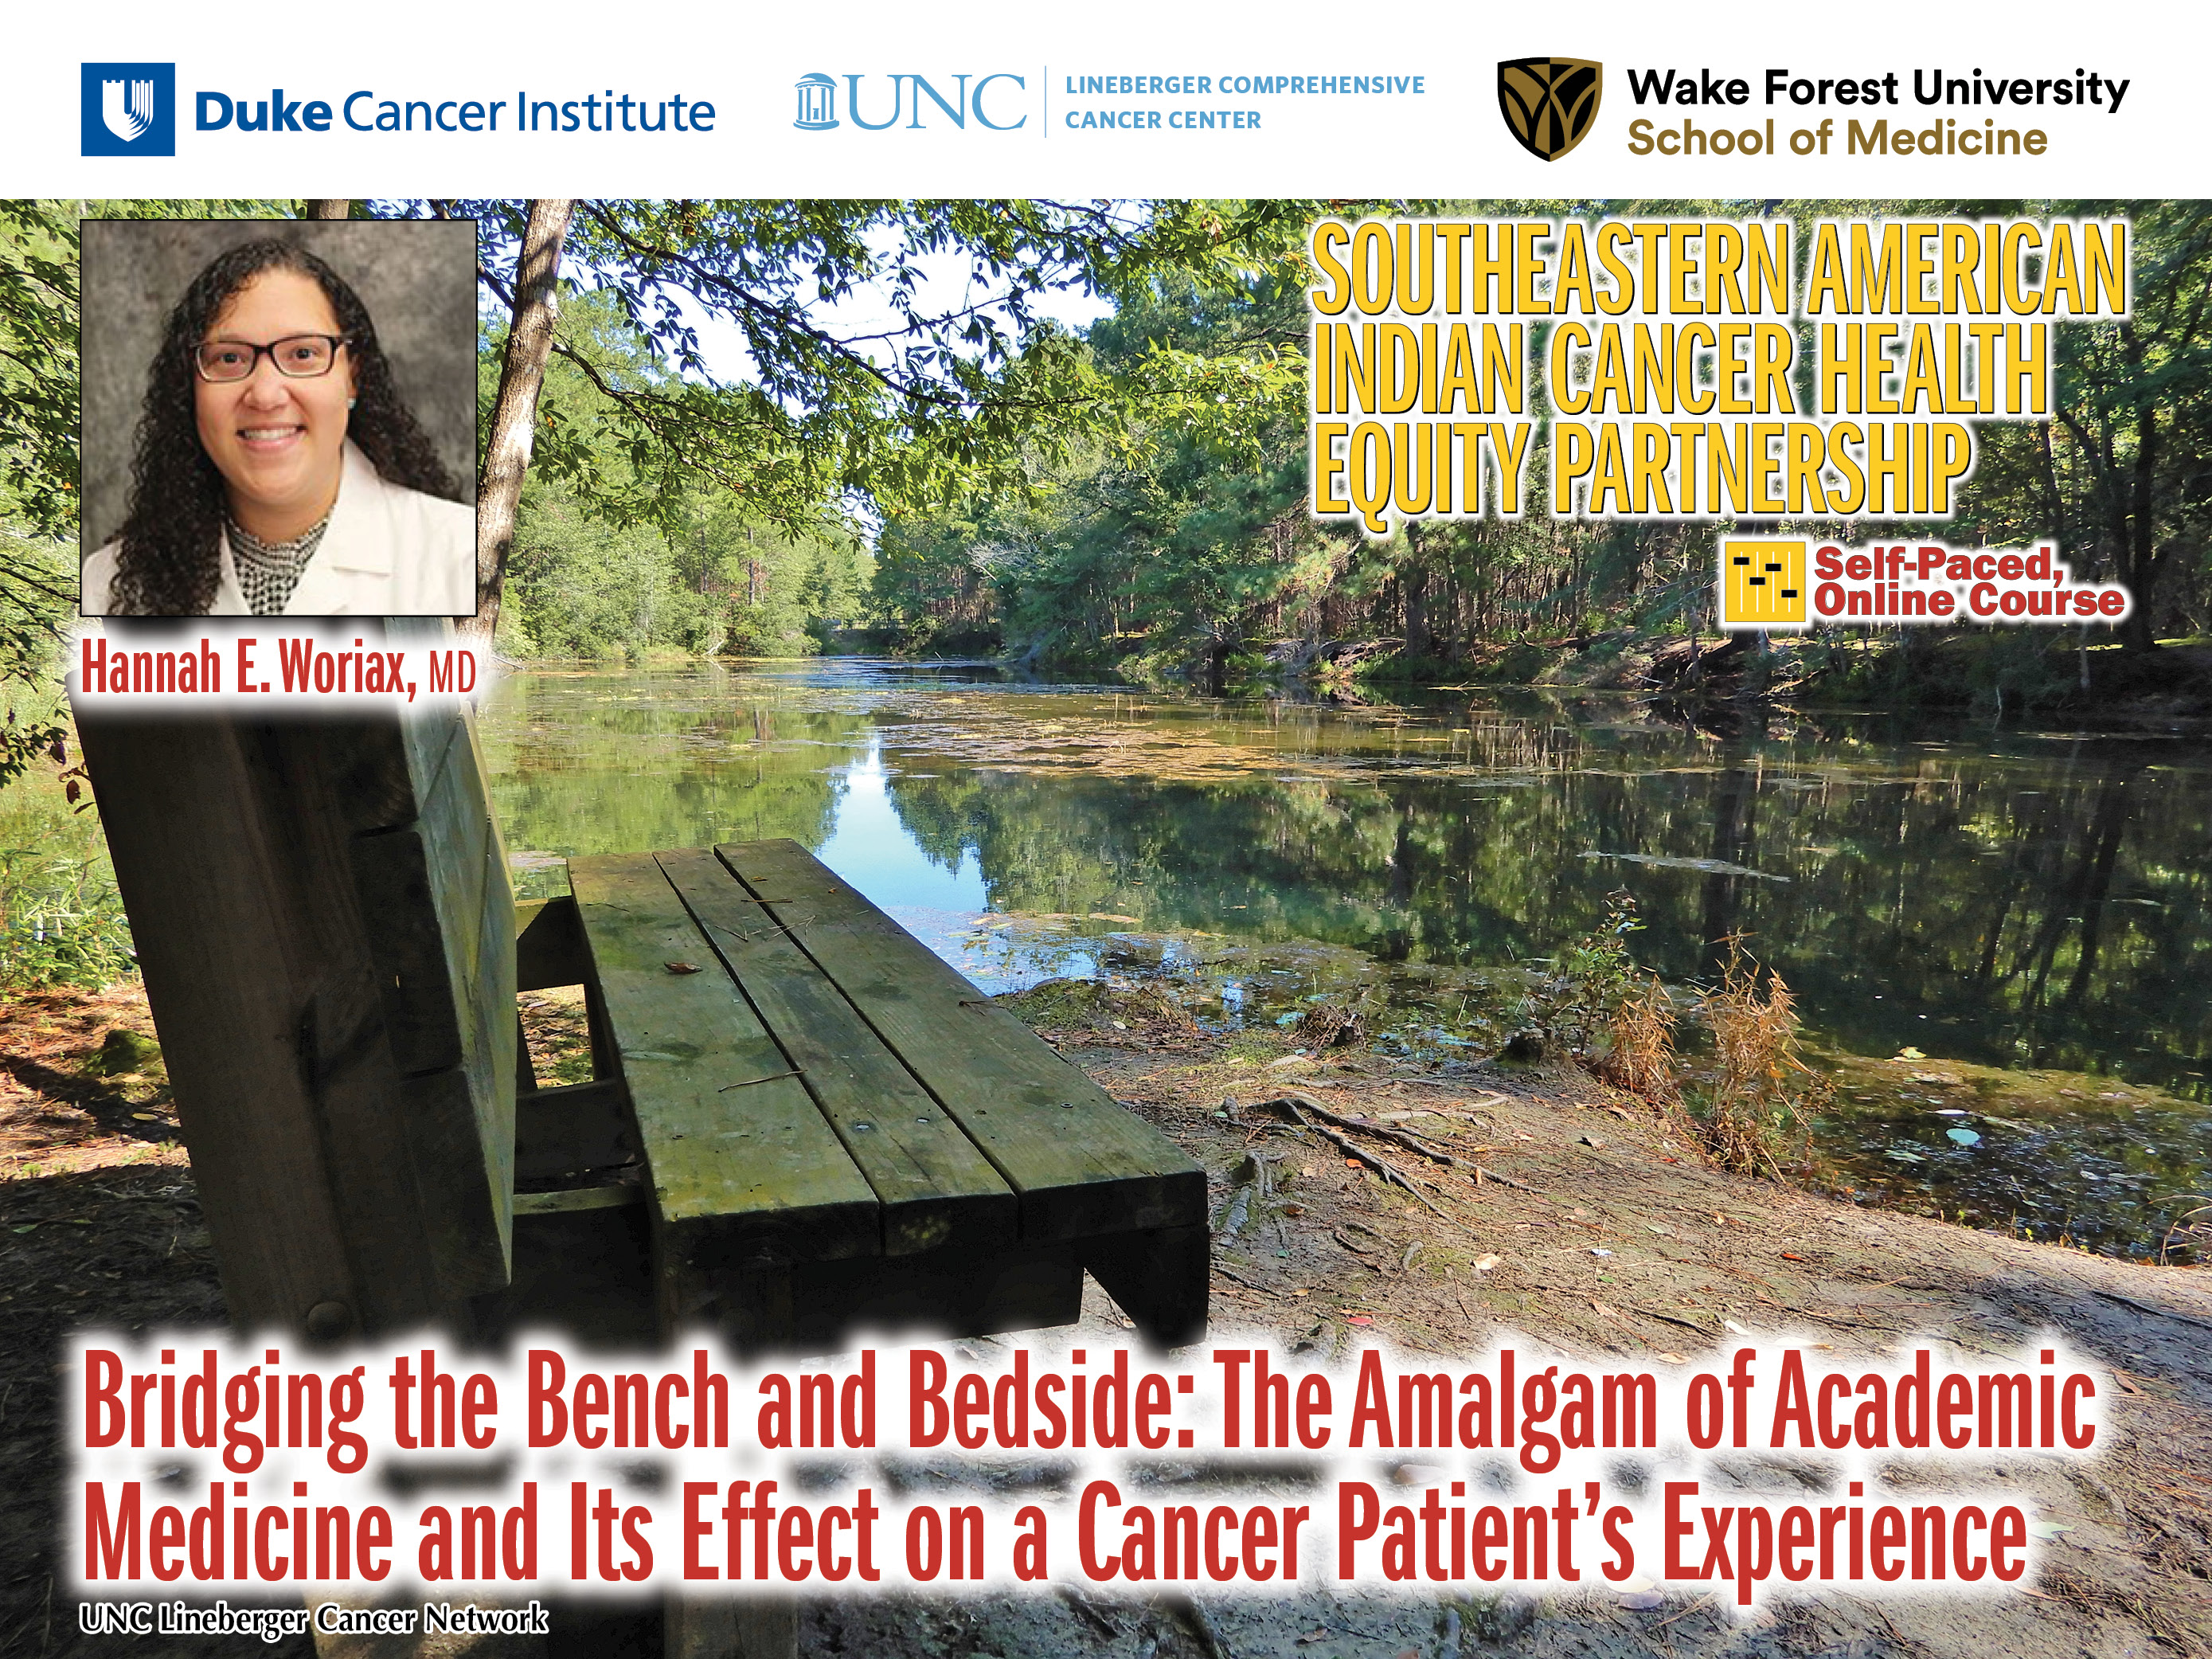 Bridging the Bench and Bedside: The Amalgam of Academic Medicine and Its Effect on a Cancer Patient Experience